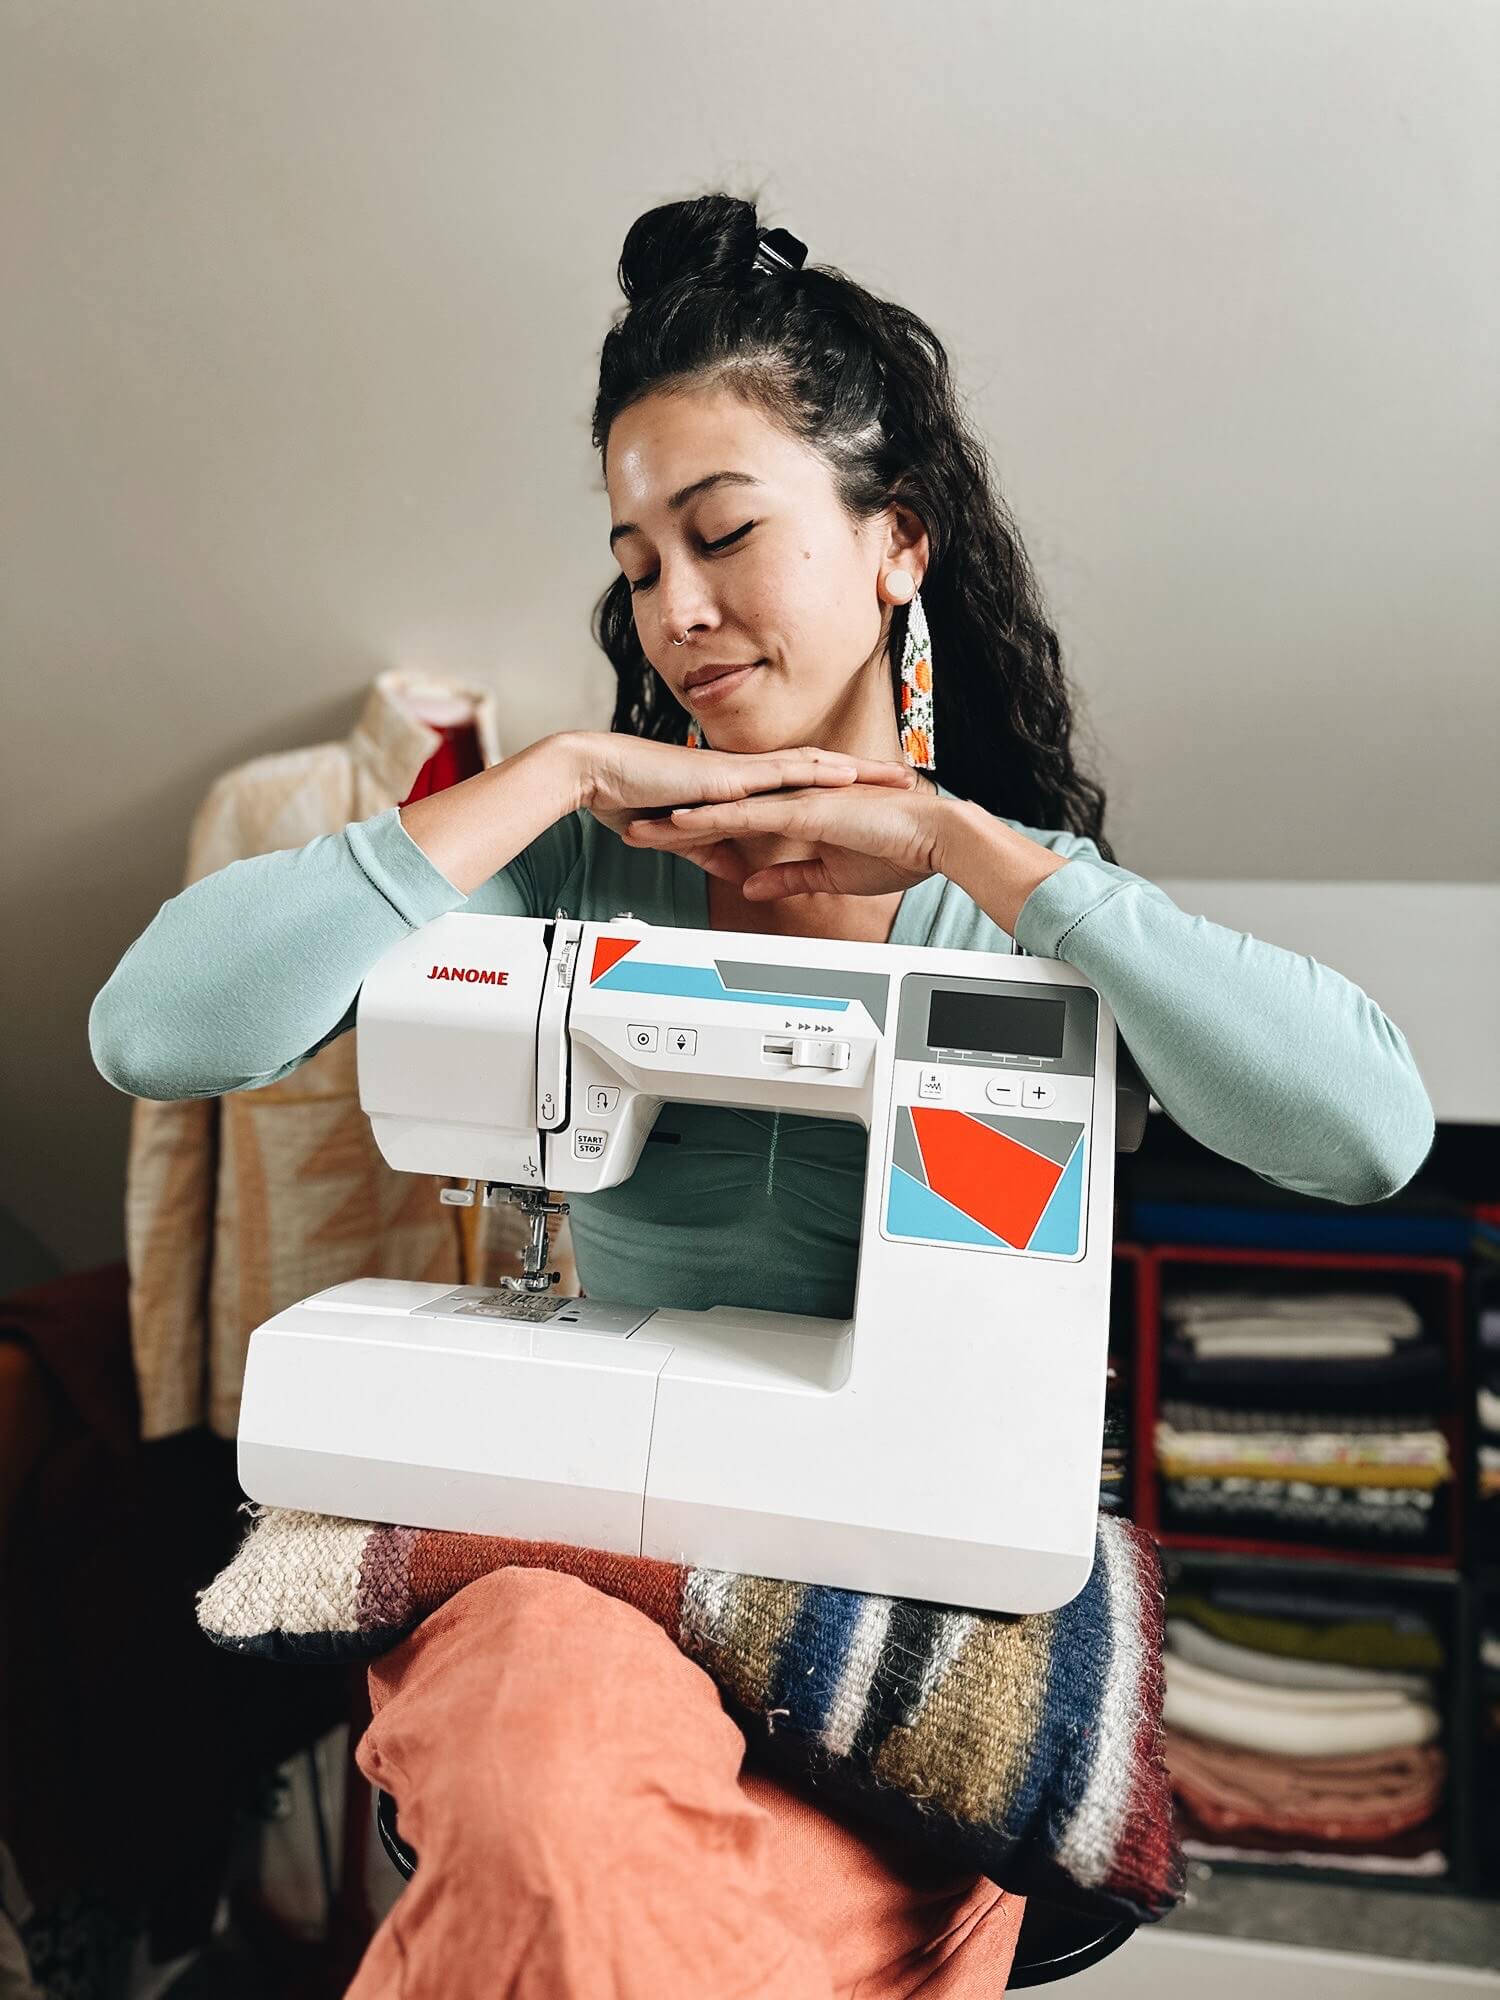 Sewing Machine Review: Janome MOD-200 – the thread